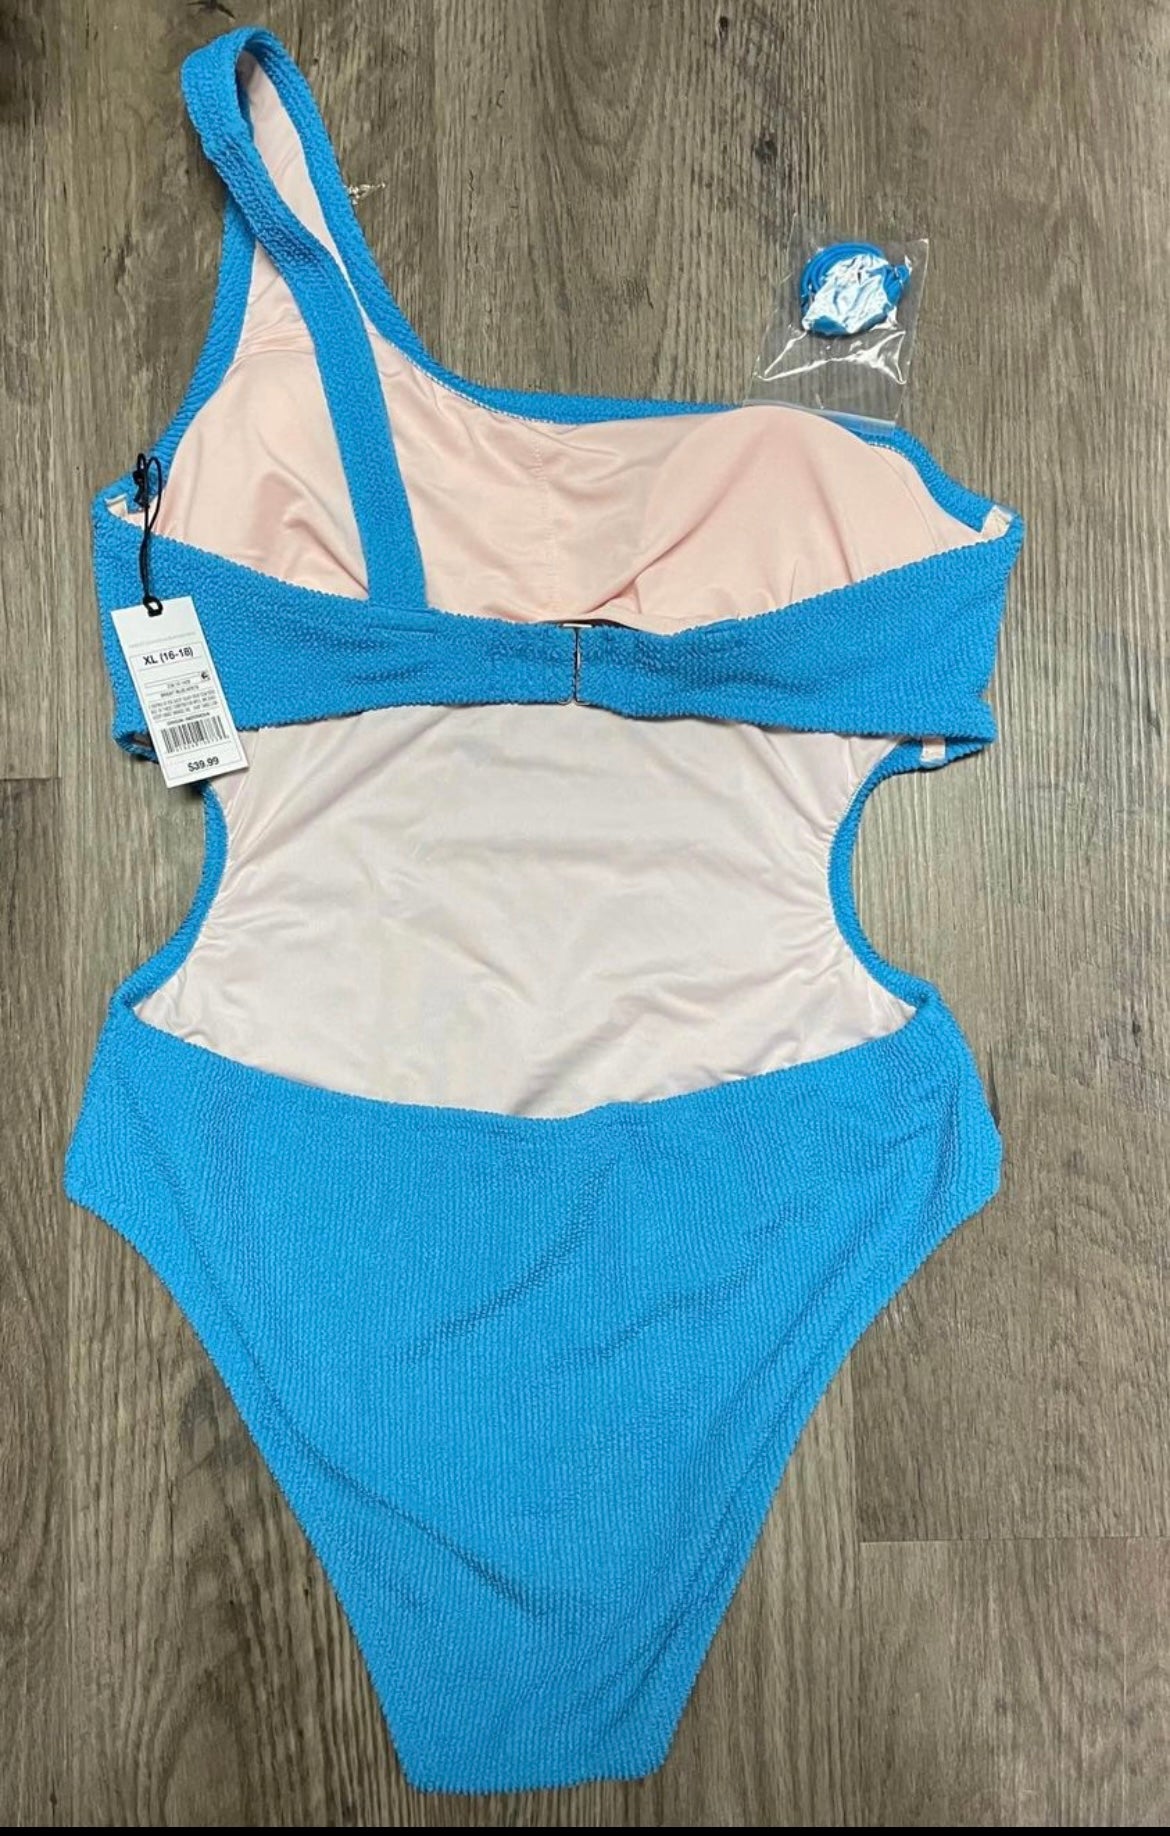 New women XL (16/18) shade and shore swimsuit